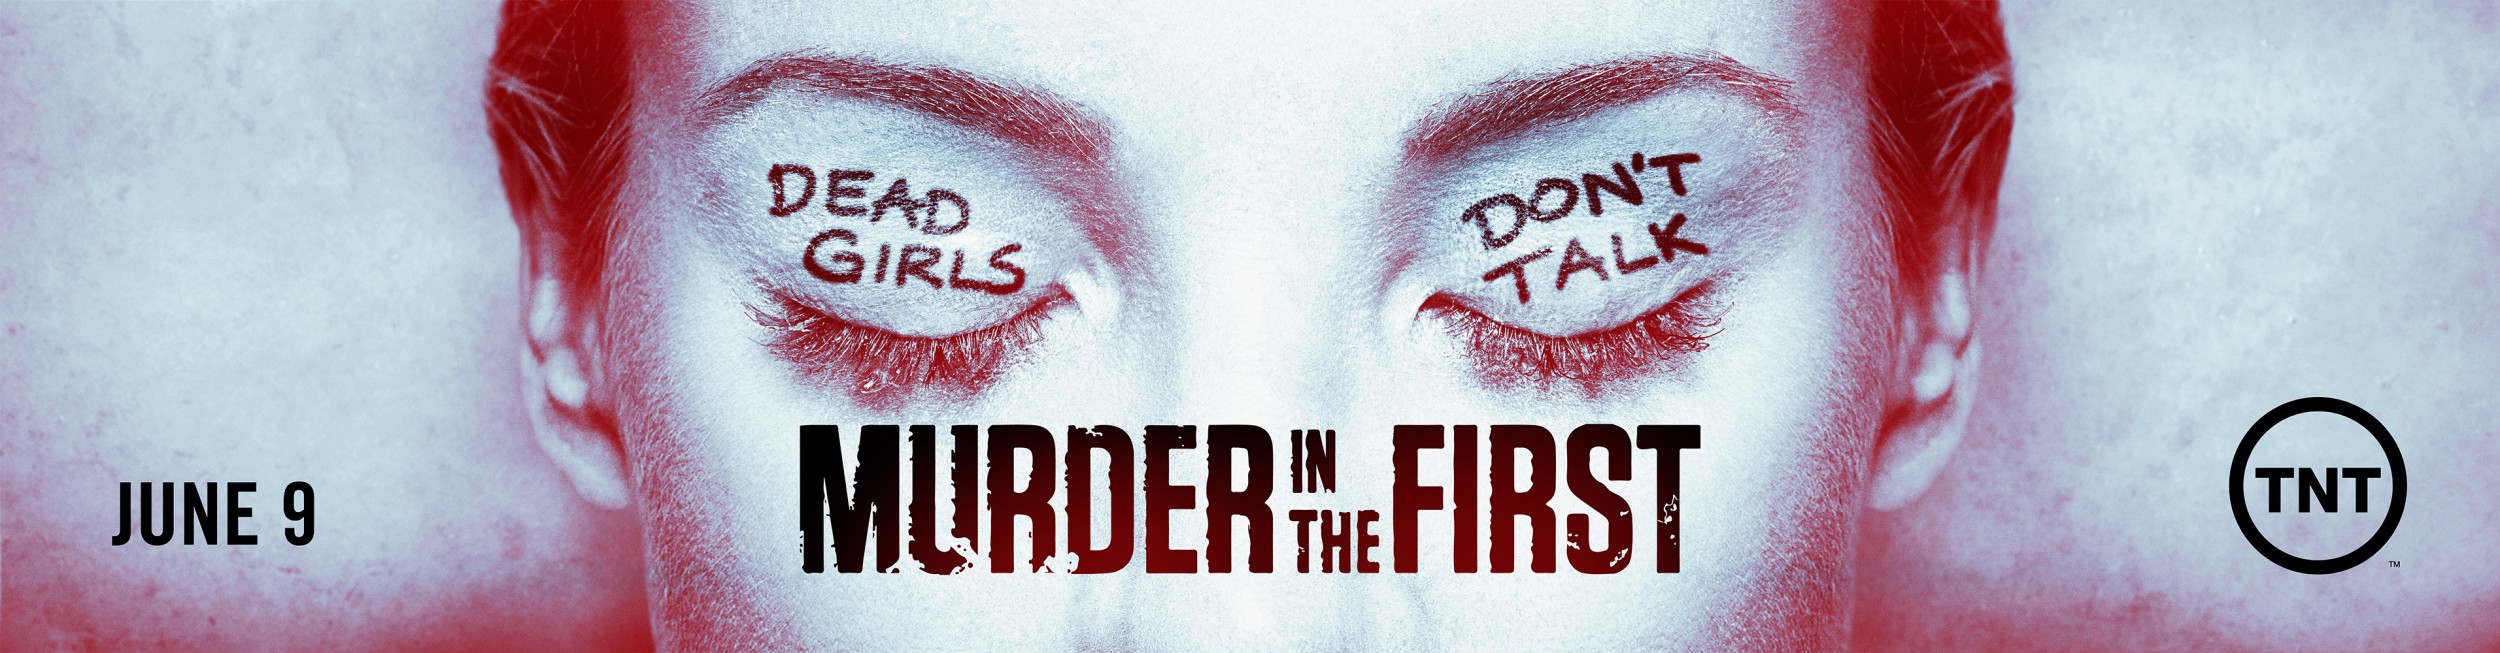 Mega Sized TV Poster Image for Murder in the First (#3 of 9)